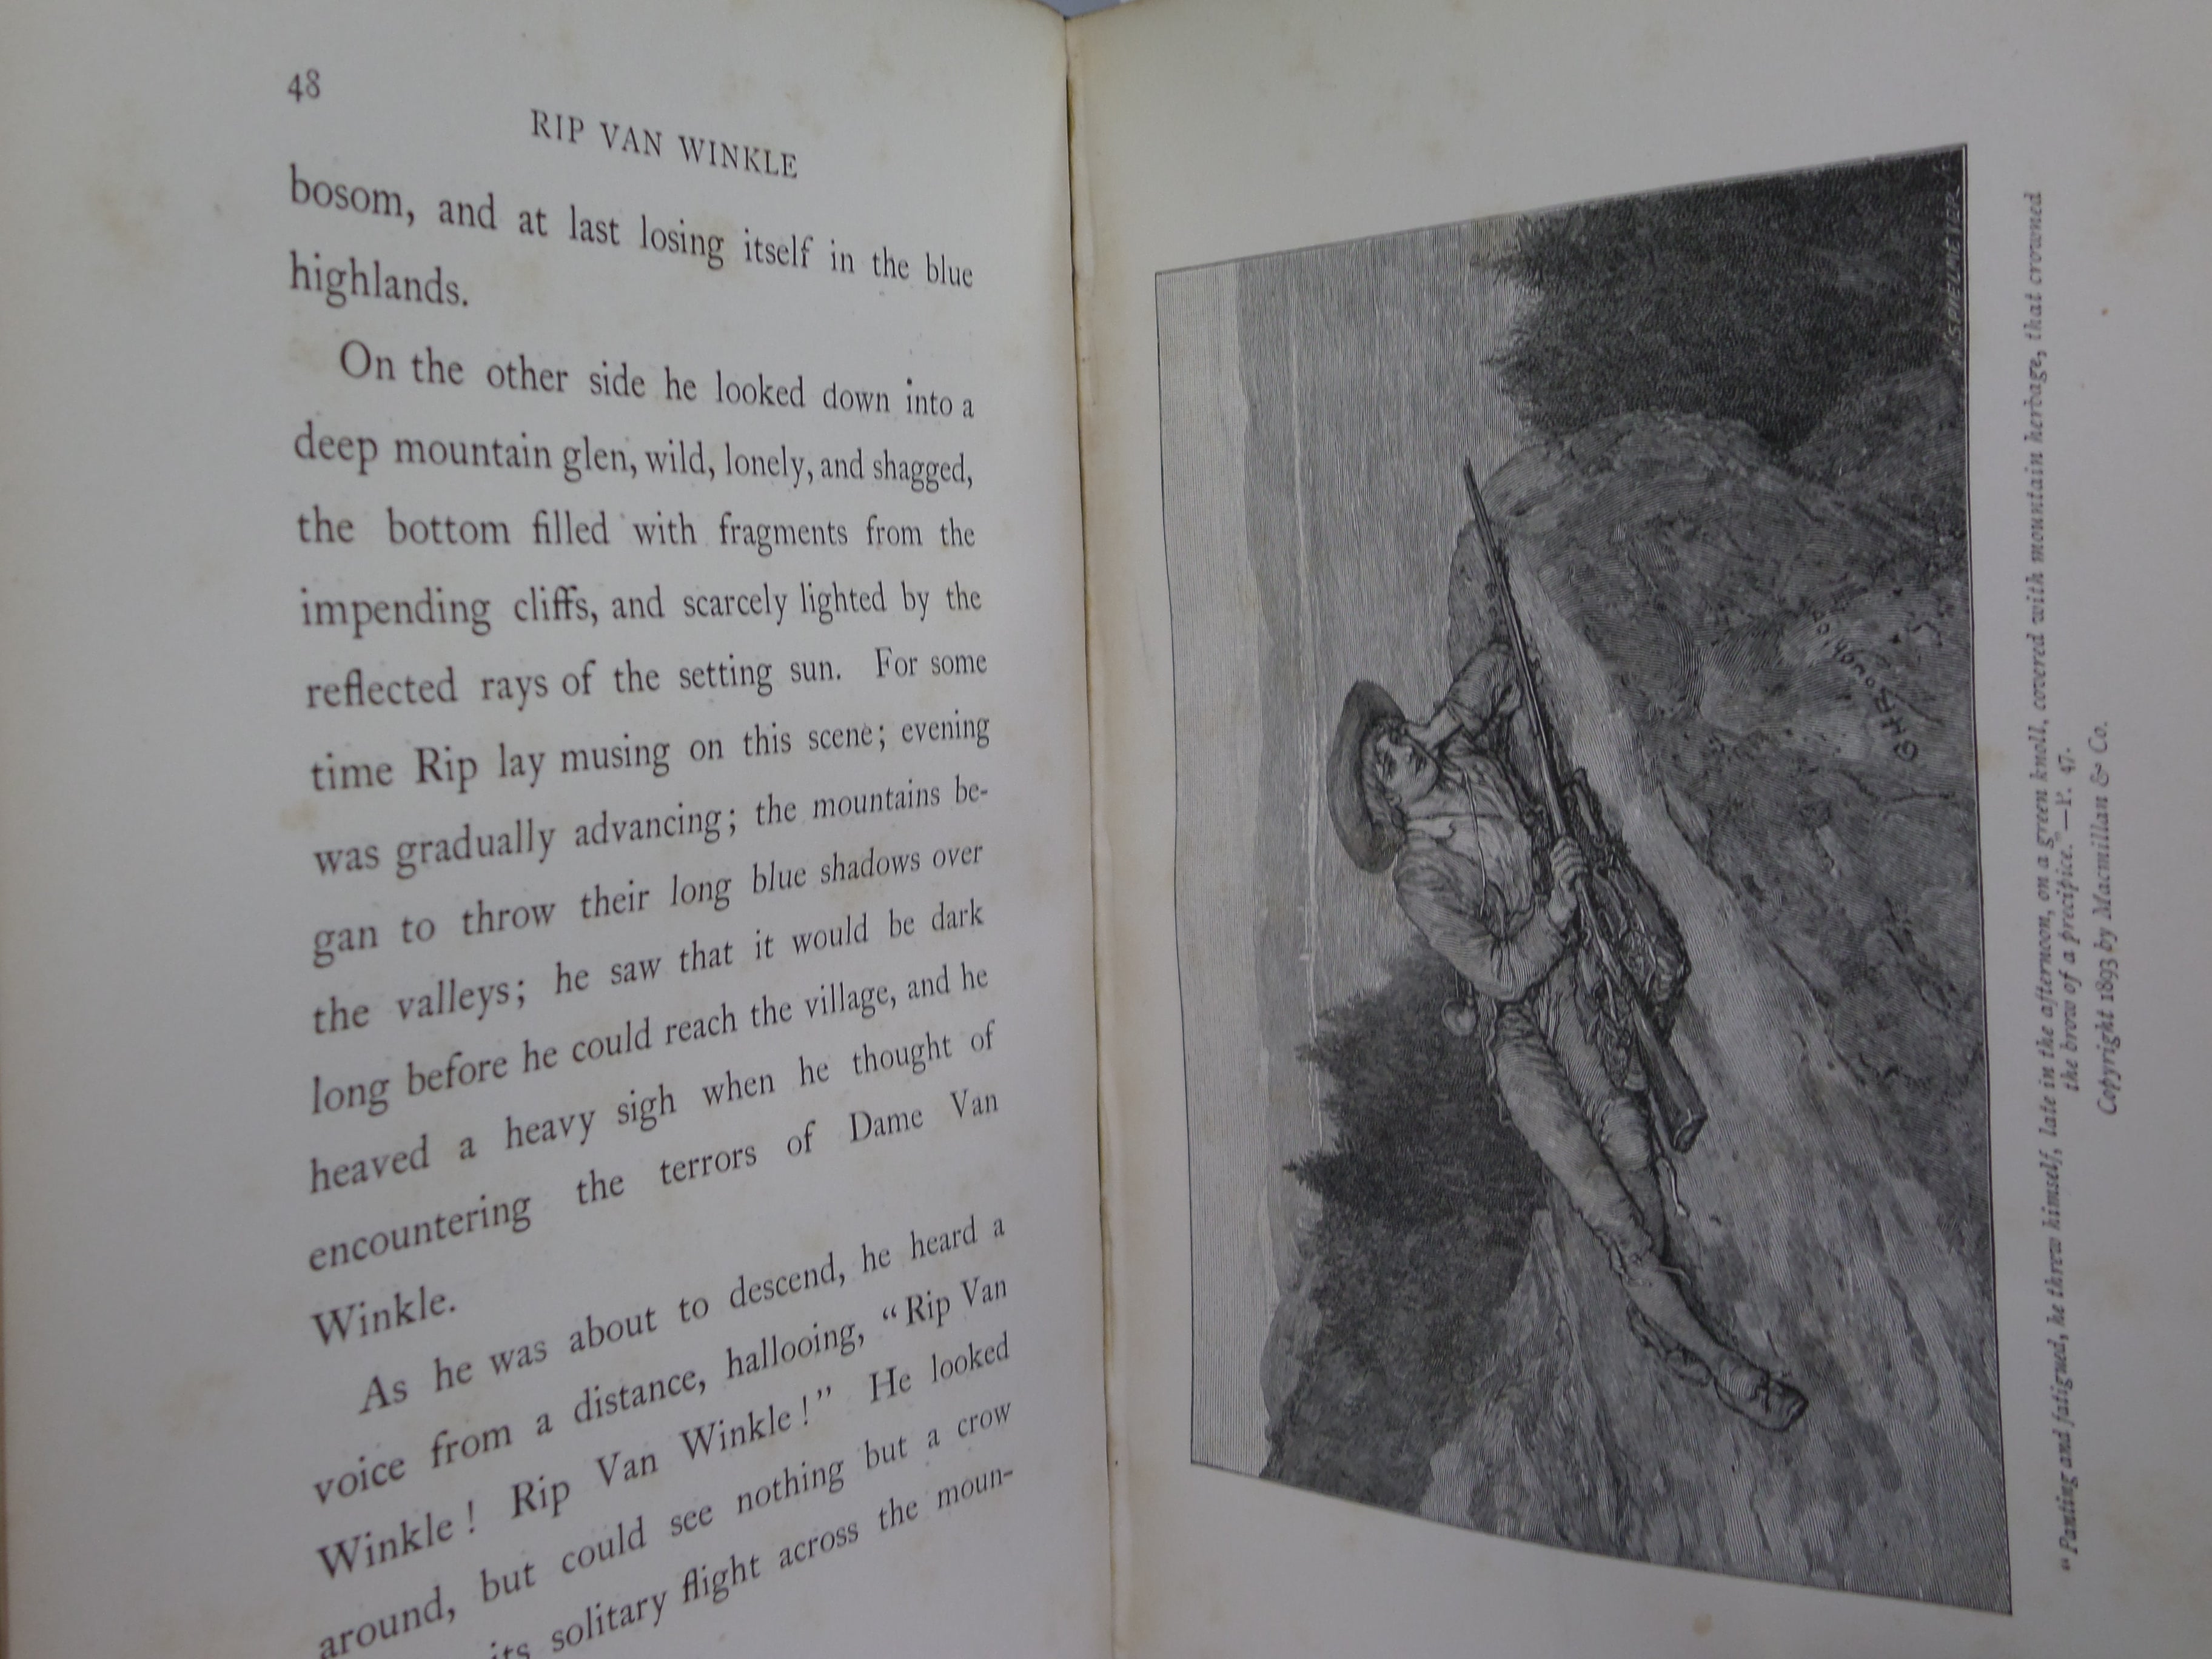 RIP VAN WINKLE AND THE LEGEND OF SLEEPY HOLLOW BY WASHINGTON IRVING 1893 GEORGE H. BOUGHTON ILLUSTRATIONS